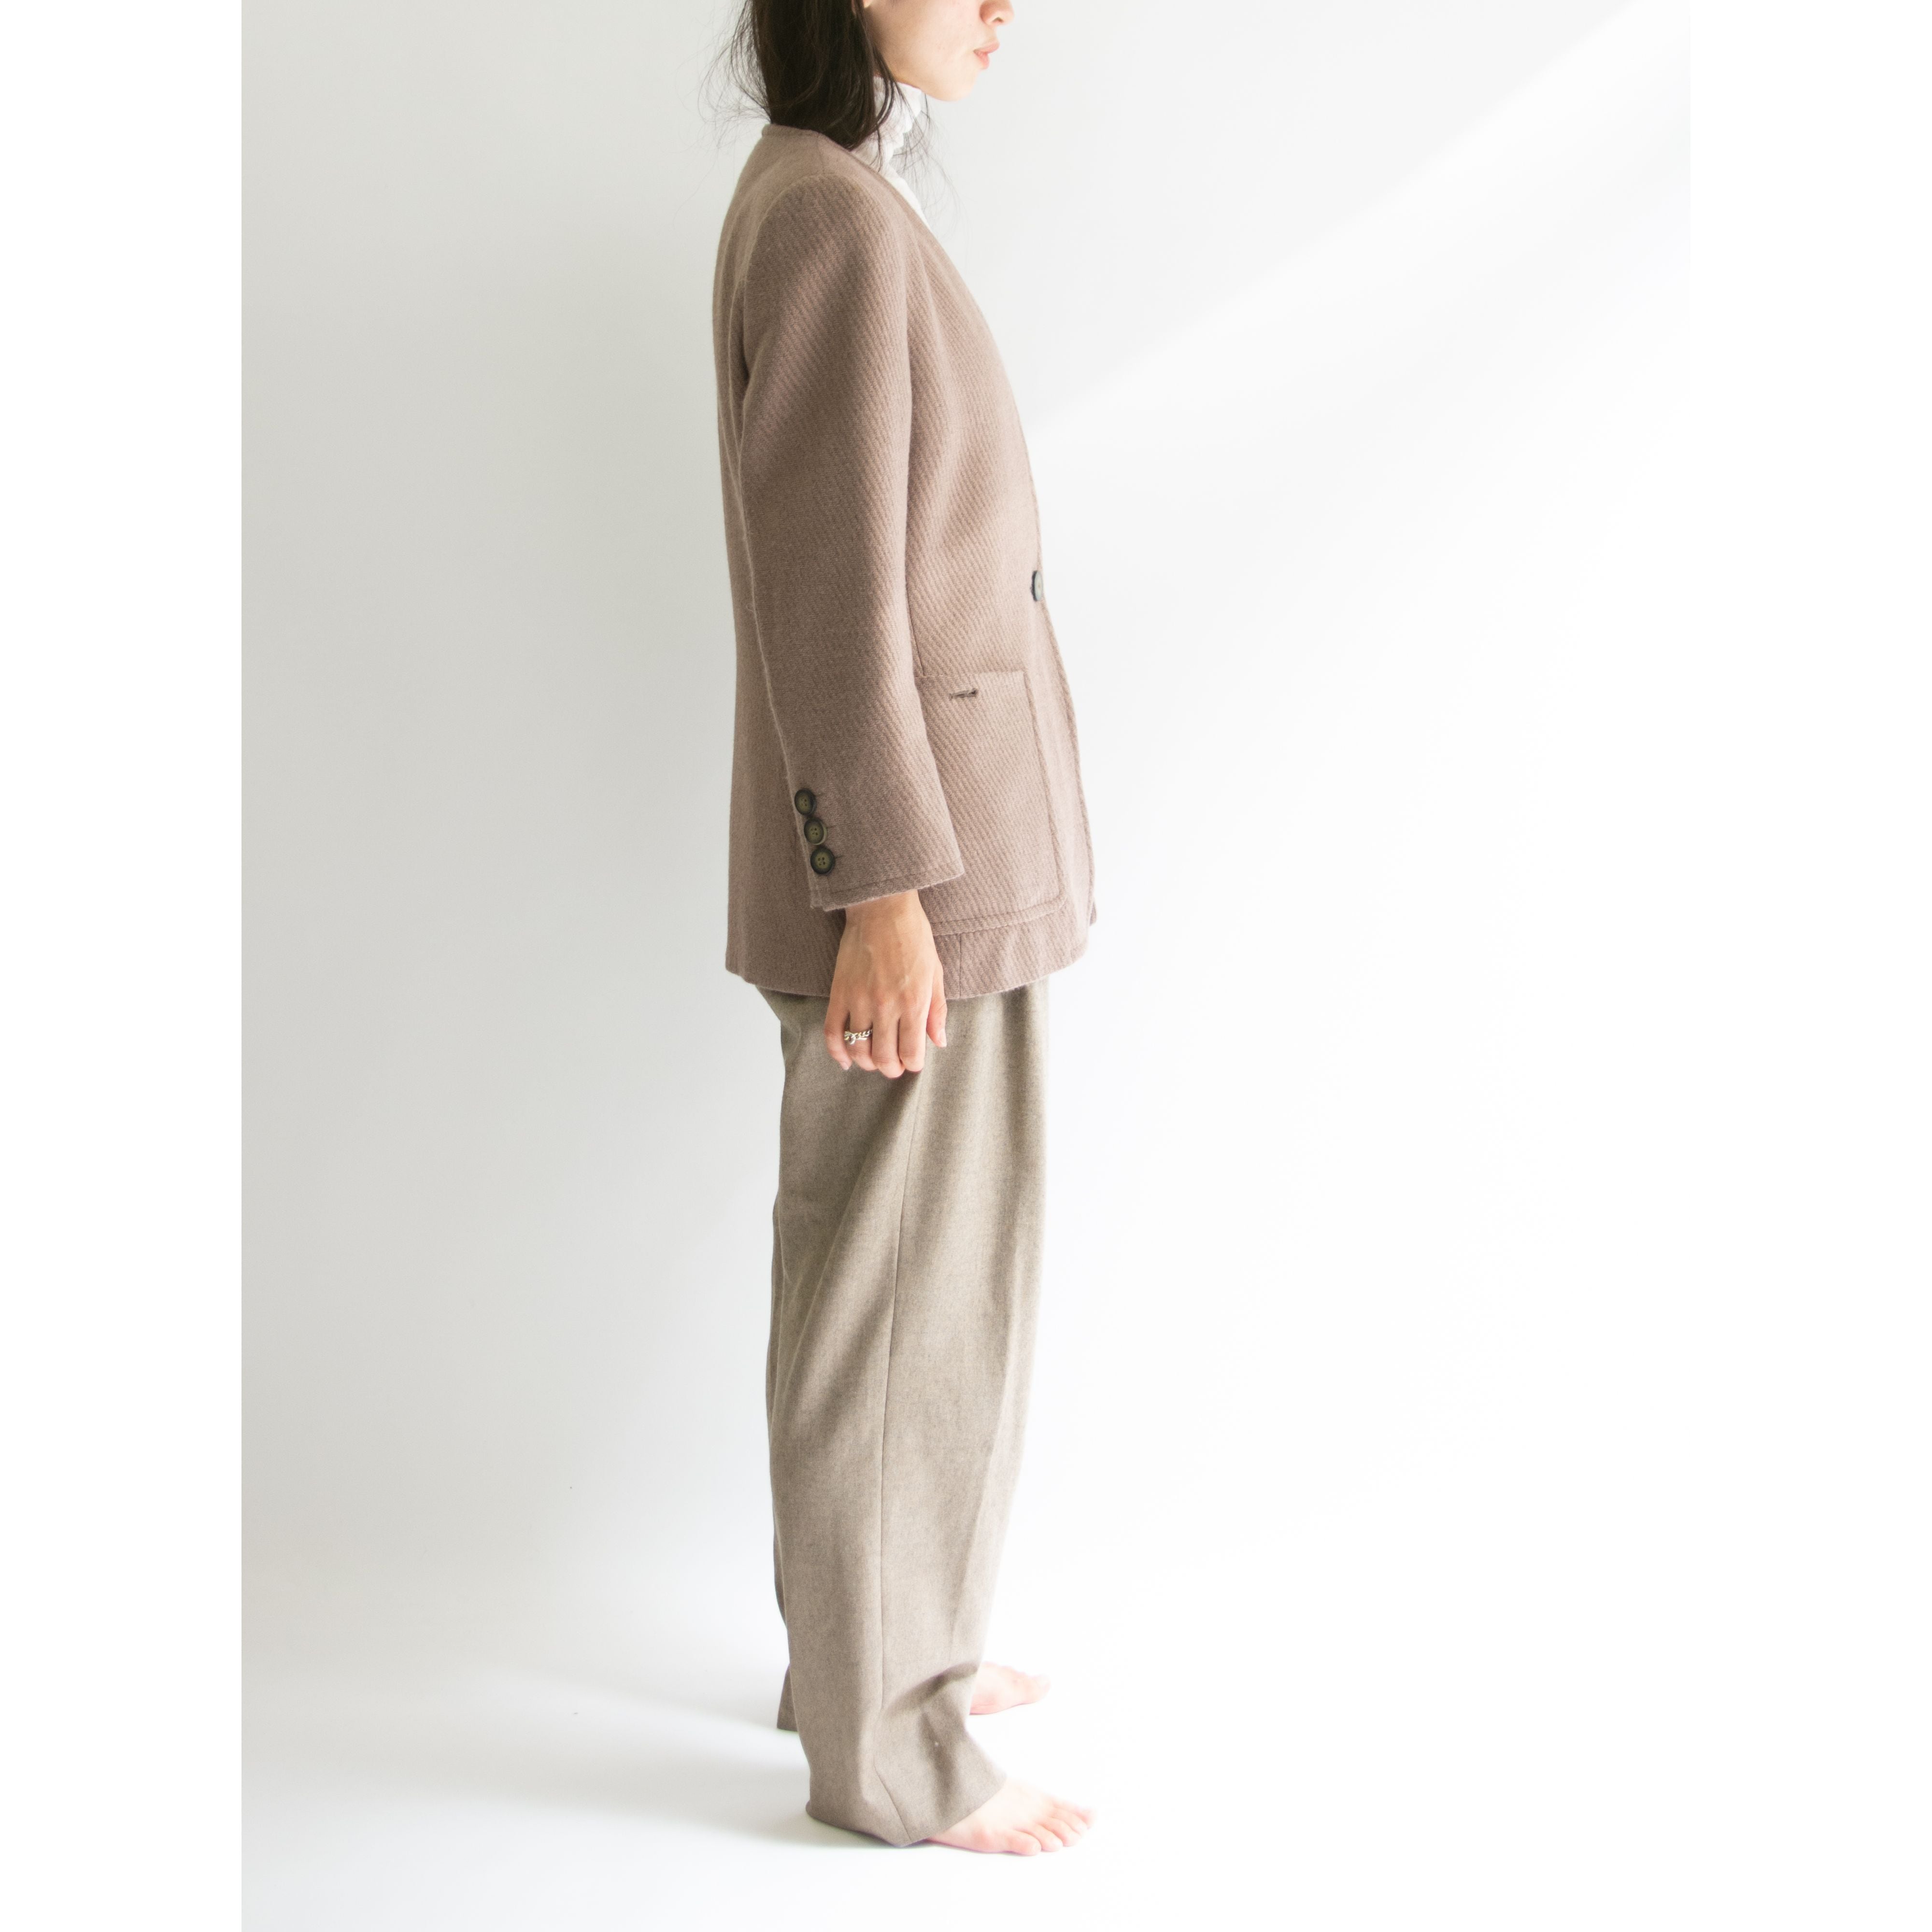 STUDIO 0001 BY FERRE】Made in Italy 80's 100% Wool Collarless